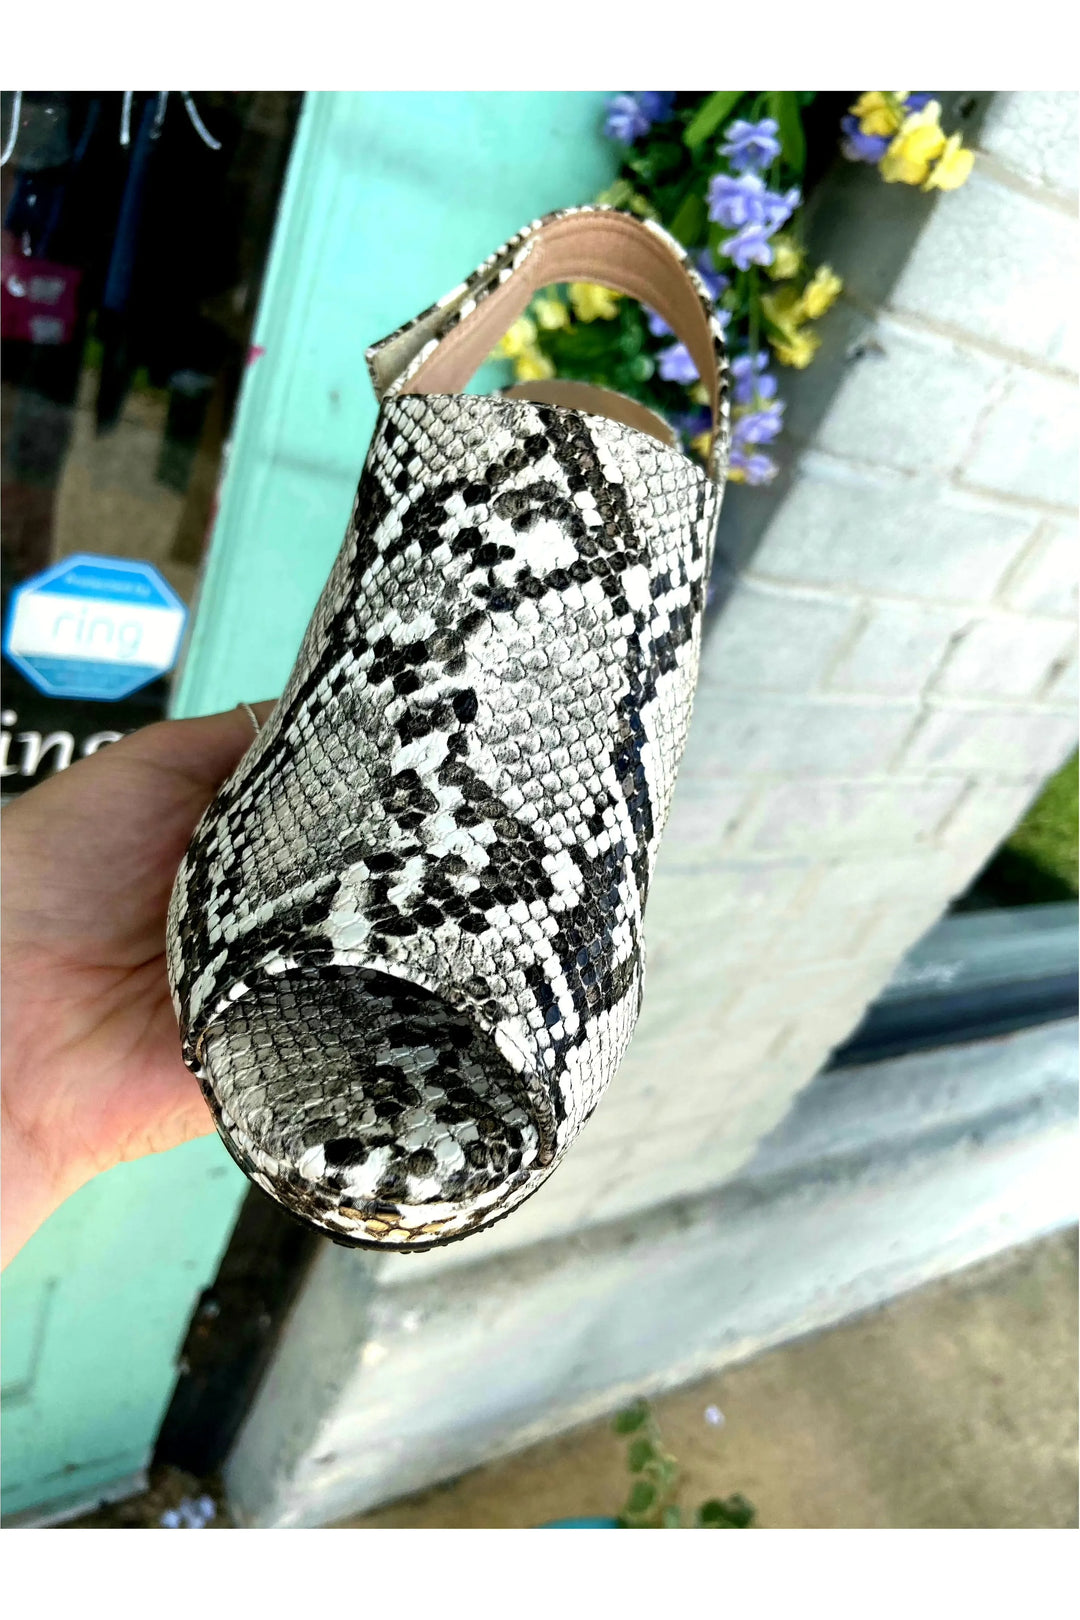 Sassy Peep Toe Black/White Snake Pattern-Shoes-Corky’s-Vintage Dragonfly-Women’s Fashion Boutique Located in Sumrall, Mississippi